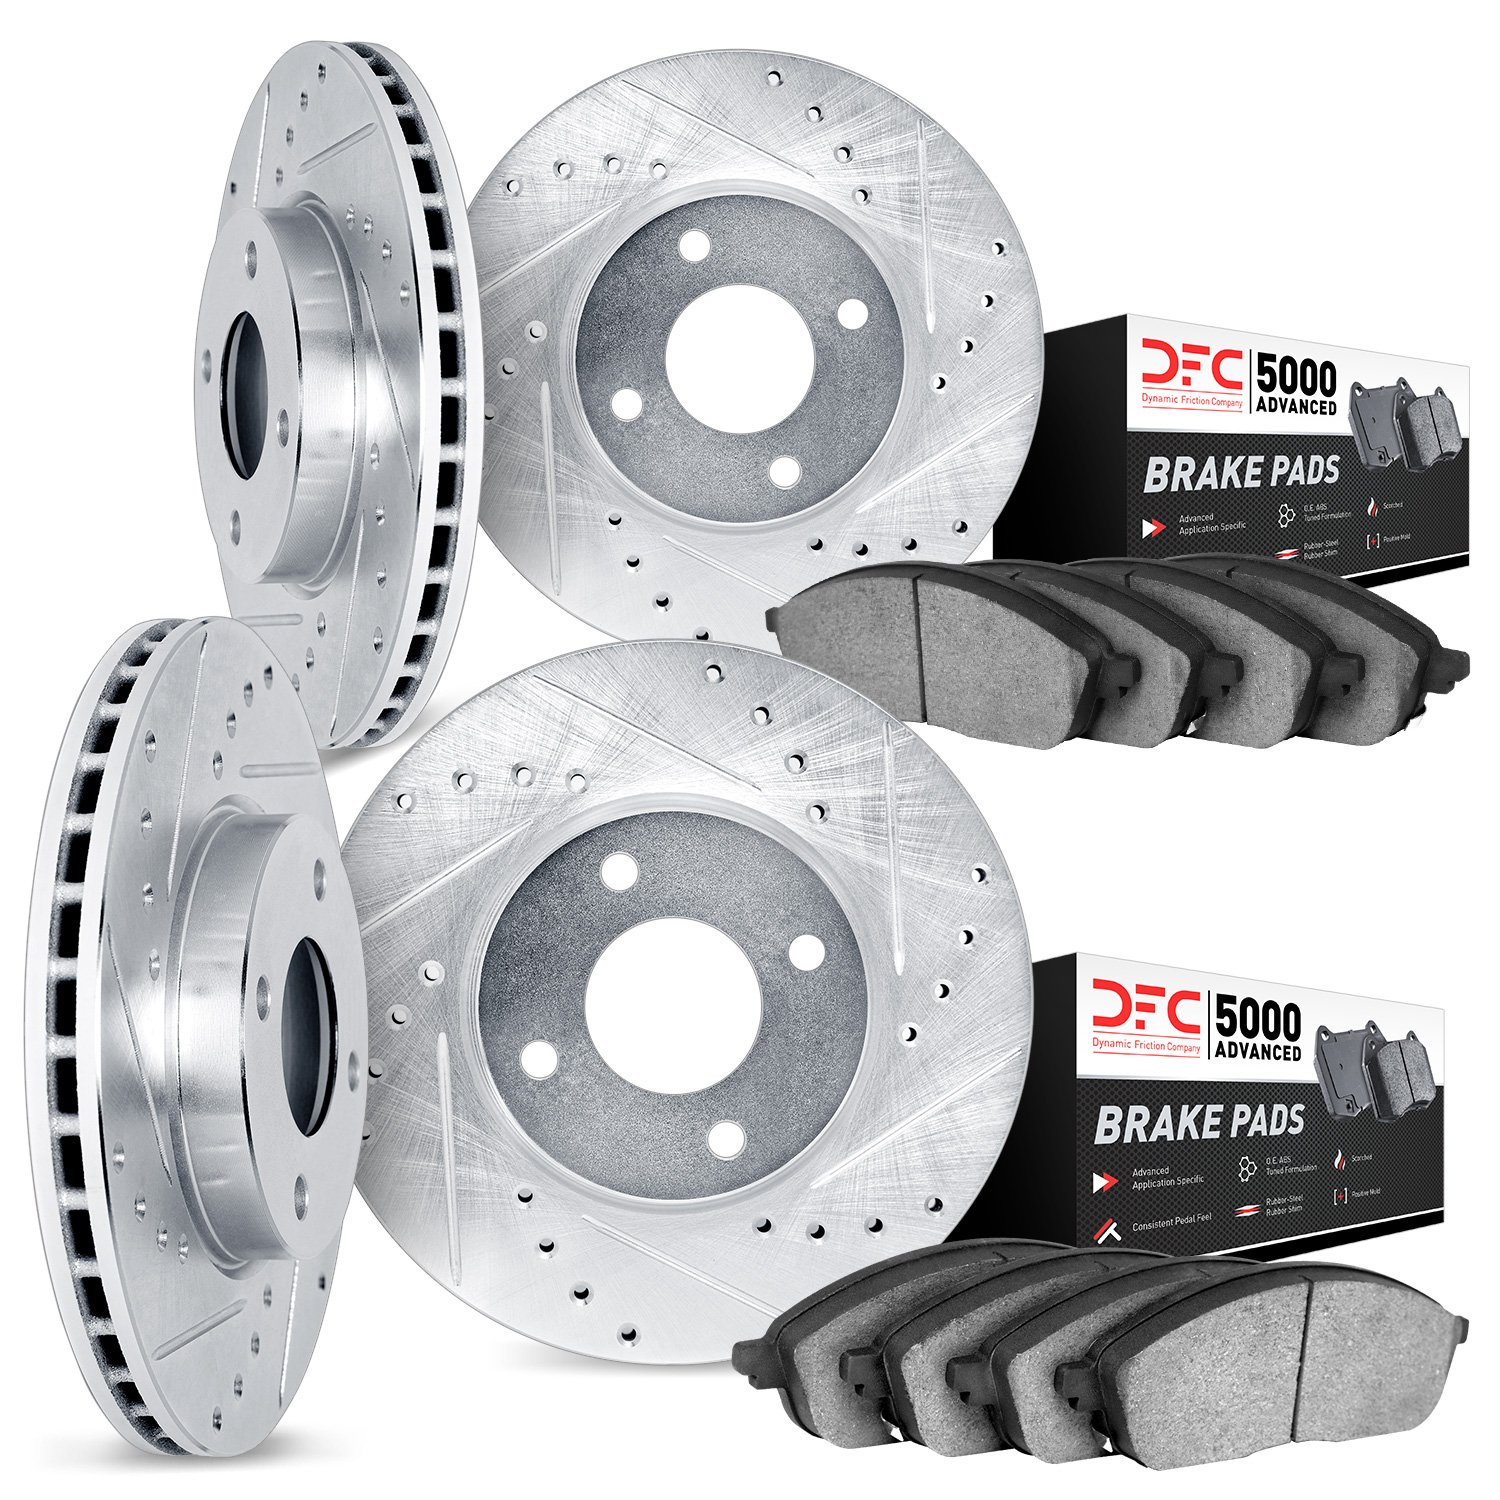 7504-56026 Drilled/Slotted Brake Rotors w/5000 Advanced Brake Pads Kit [Silver], 1995-2000 Ford/Lincoln/Mercury/Mazda, Position: